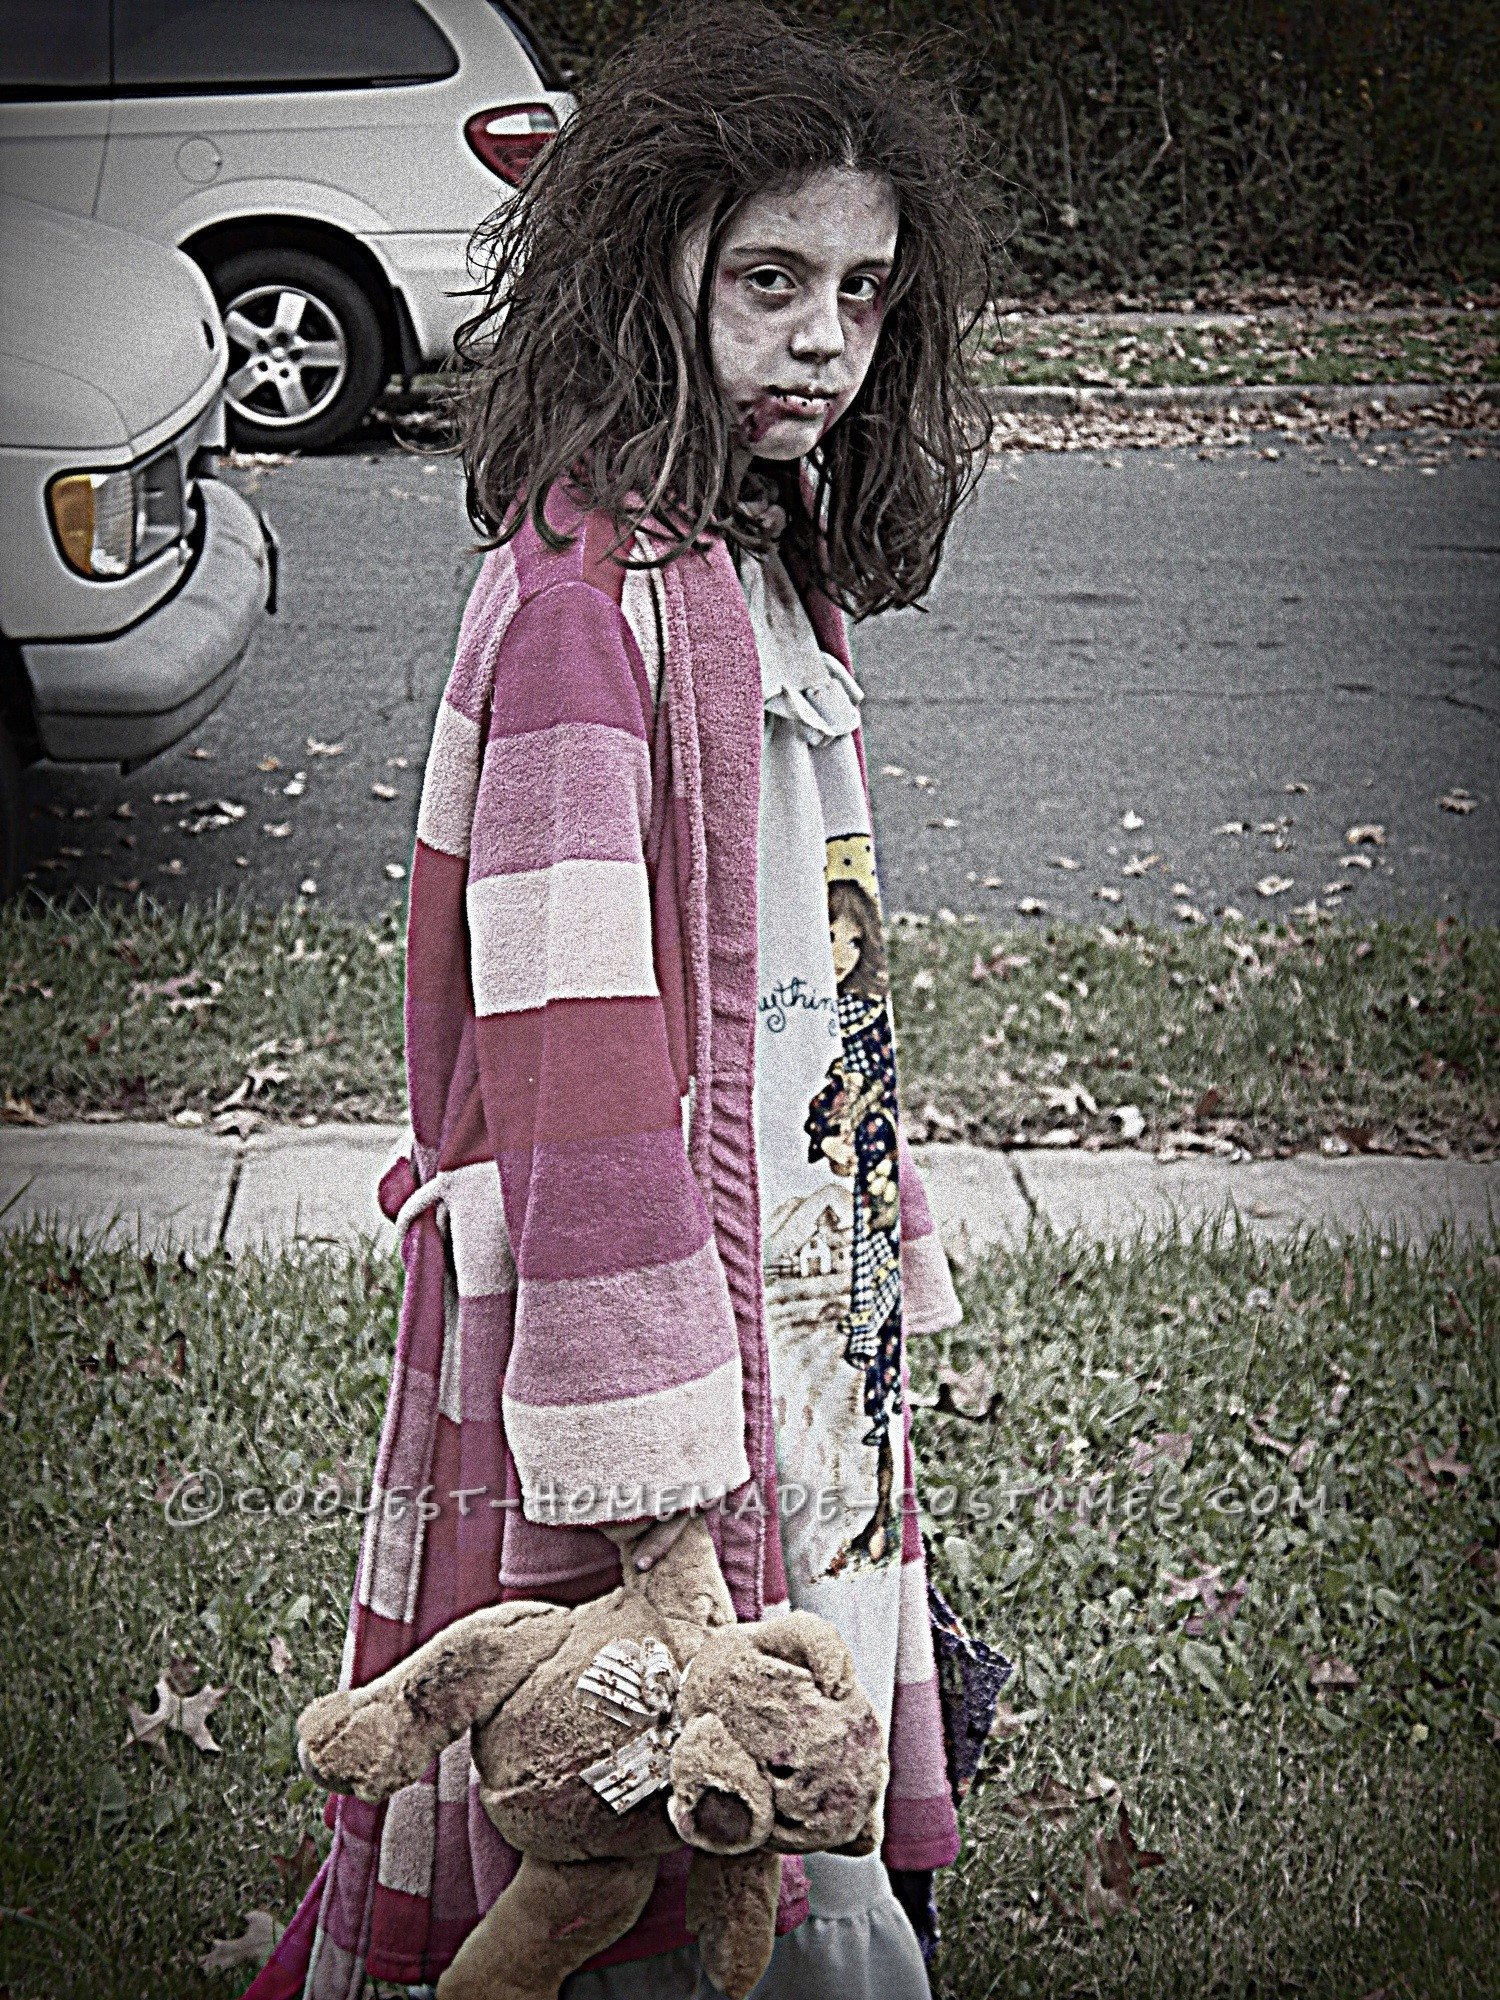 DIY Kid Zombie Costume
 Scary Homemade Costume for a Girl Little Zombie Girl